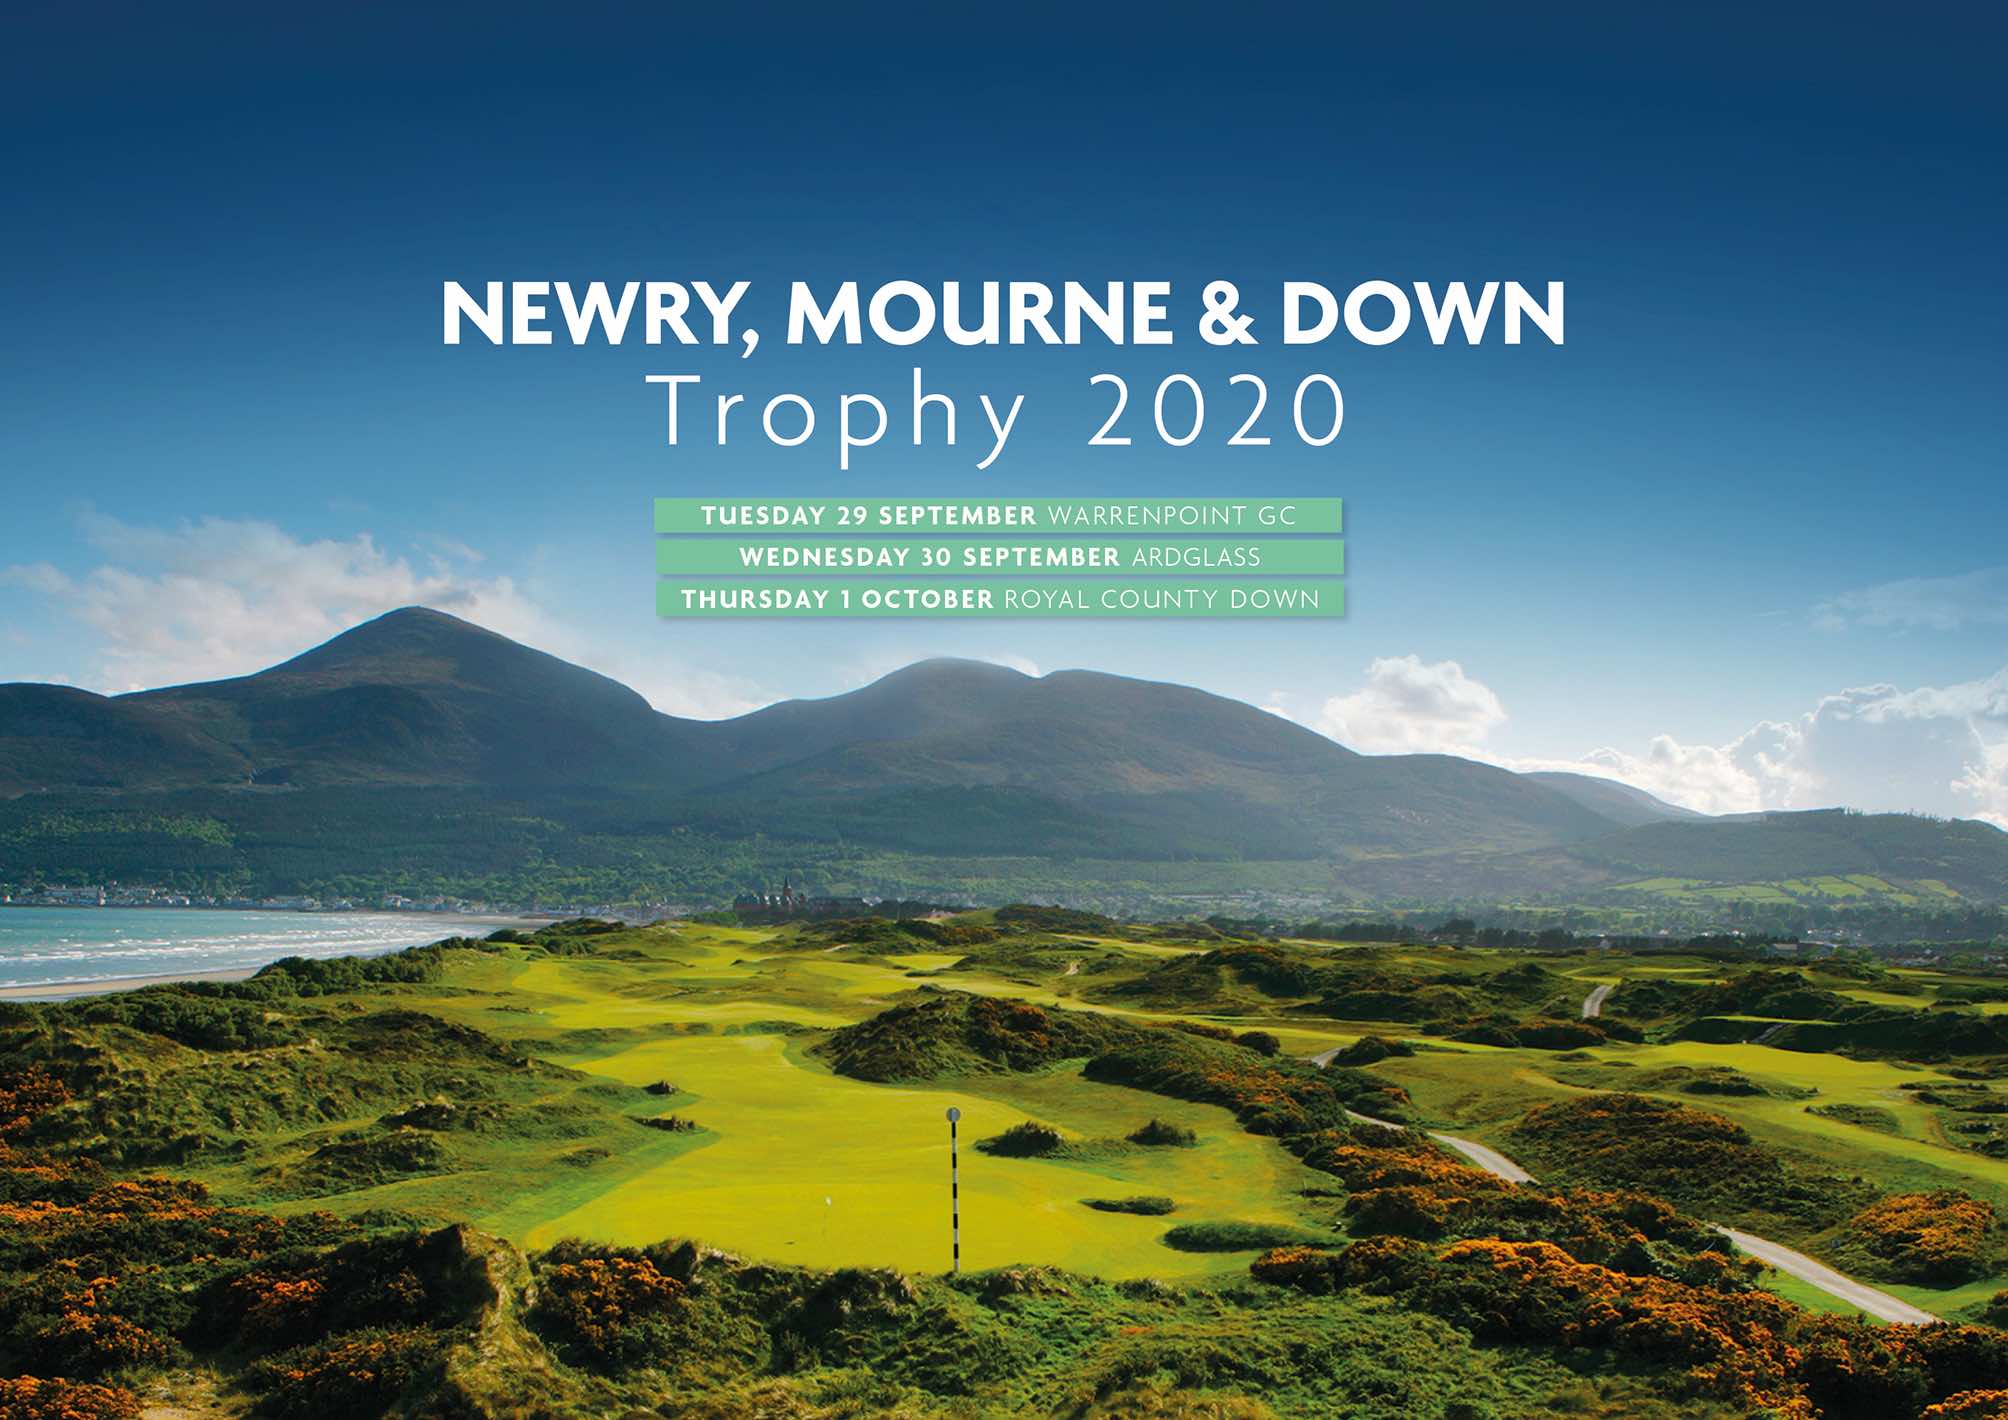 Newry, Mourne & Down Trophy 2020 launched